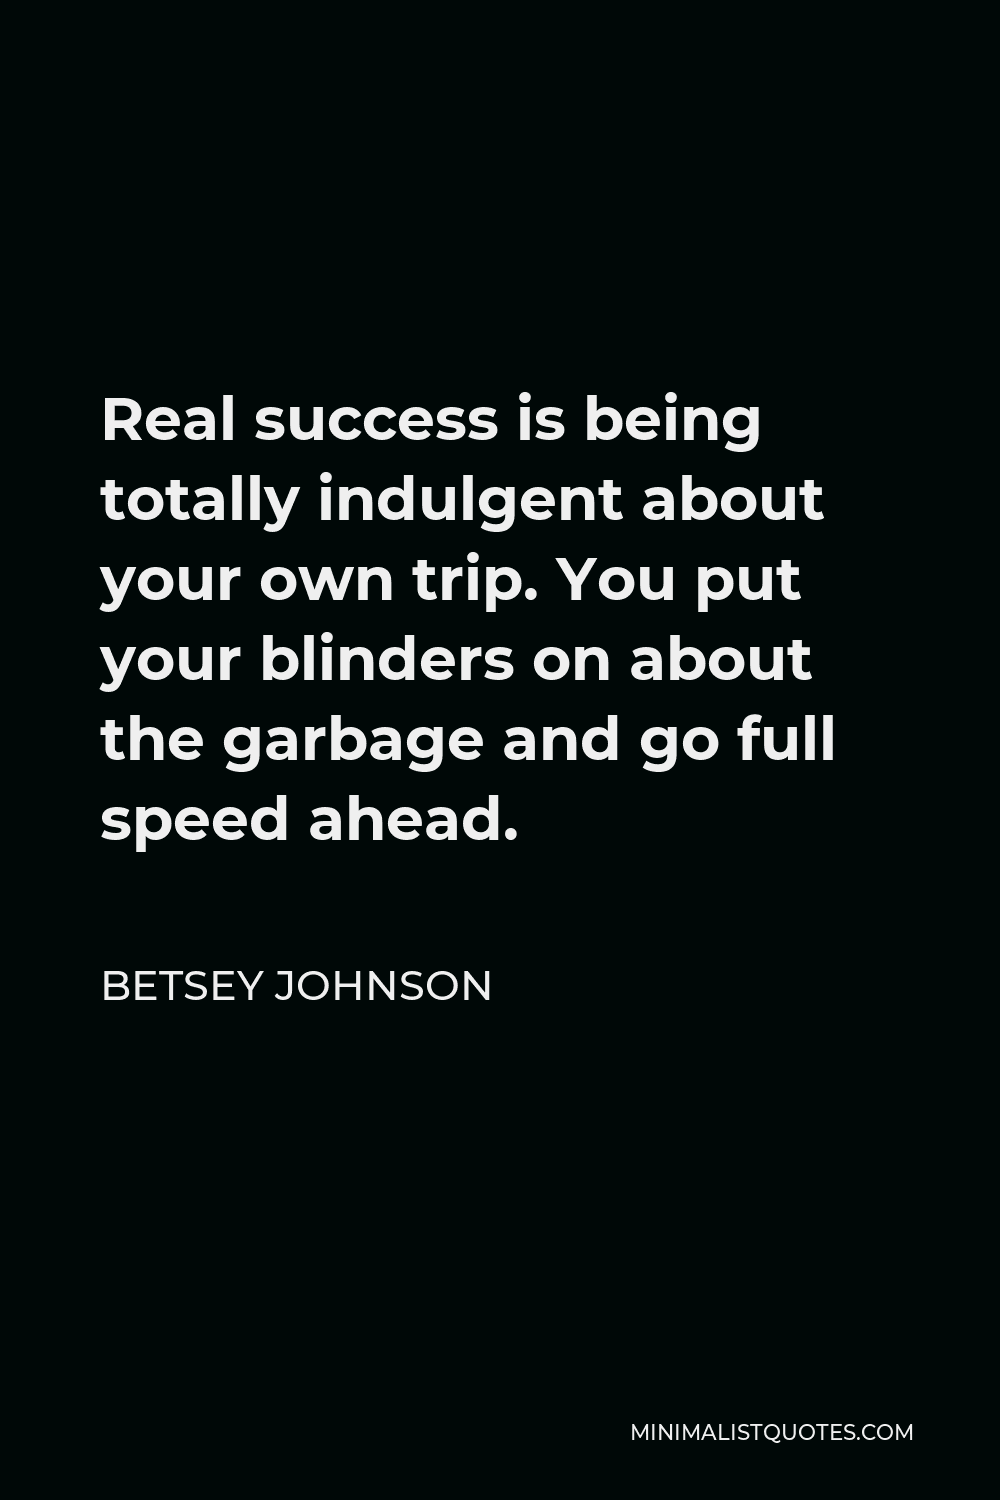 Betsey Johnson Quote - Real success is being totally indulgent about your own trip. You put your blinders on about the garbage and go full speed ahead.